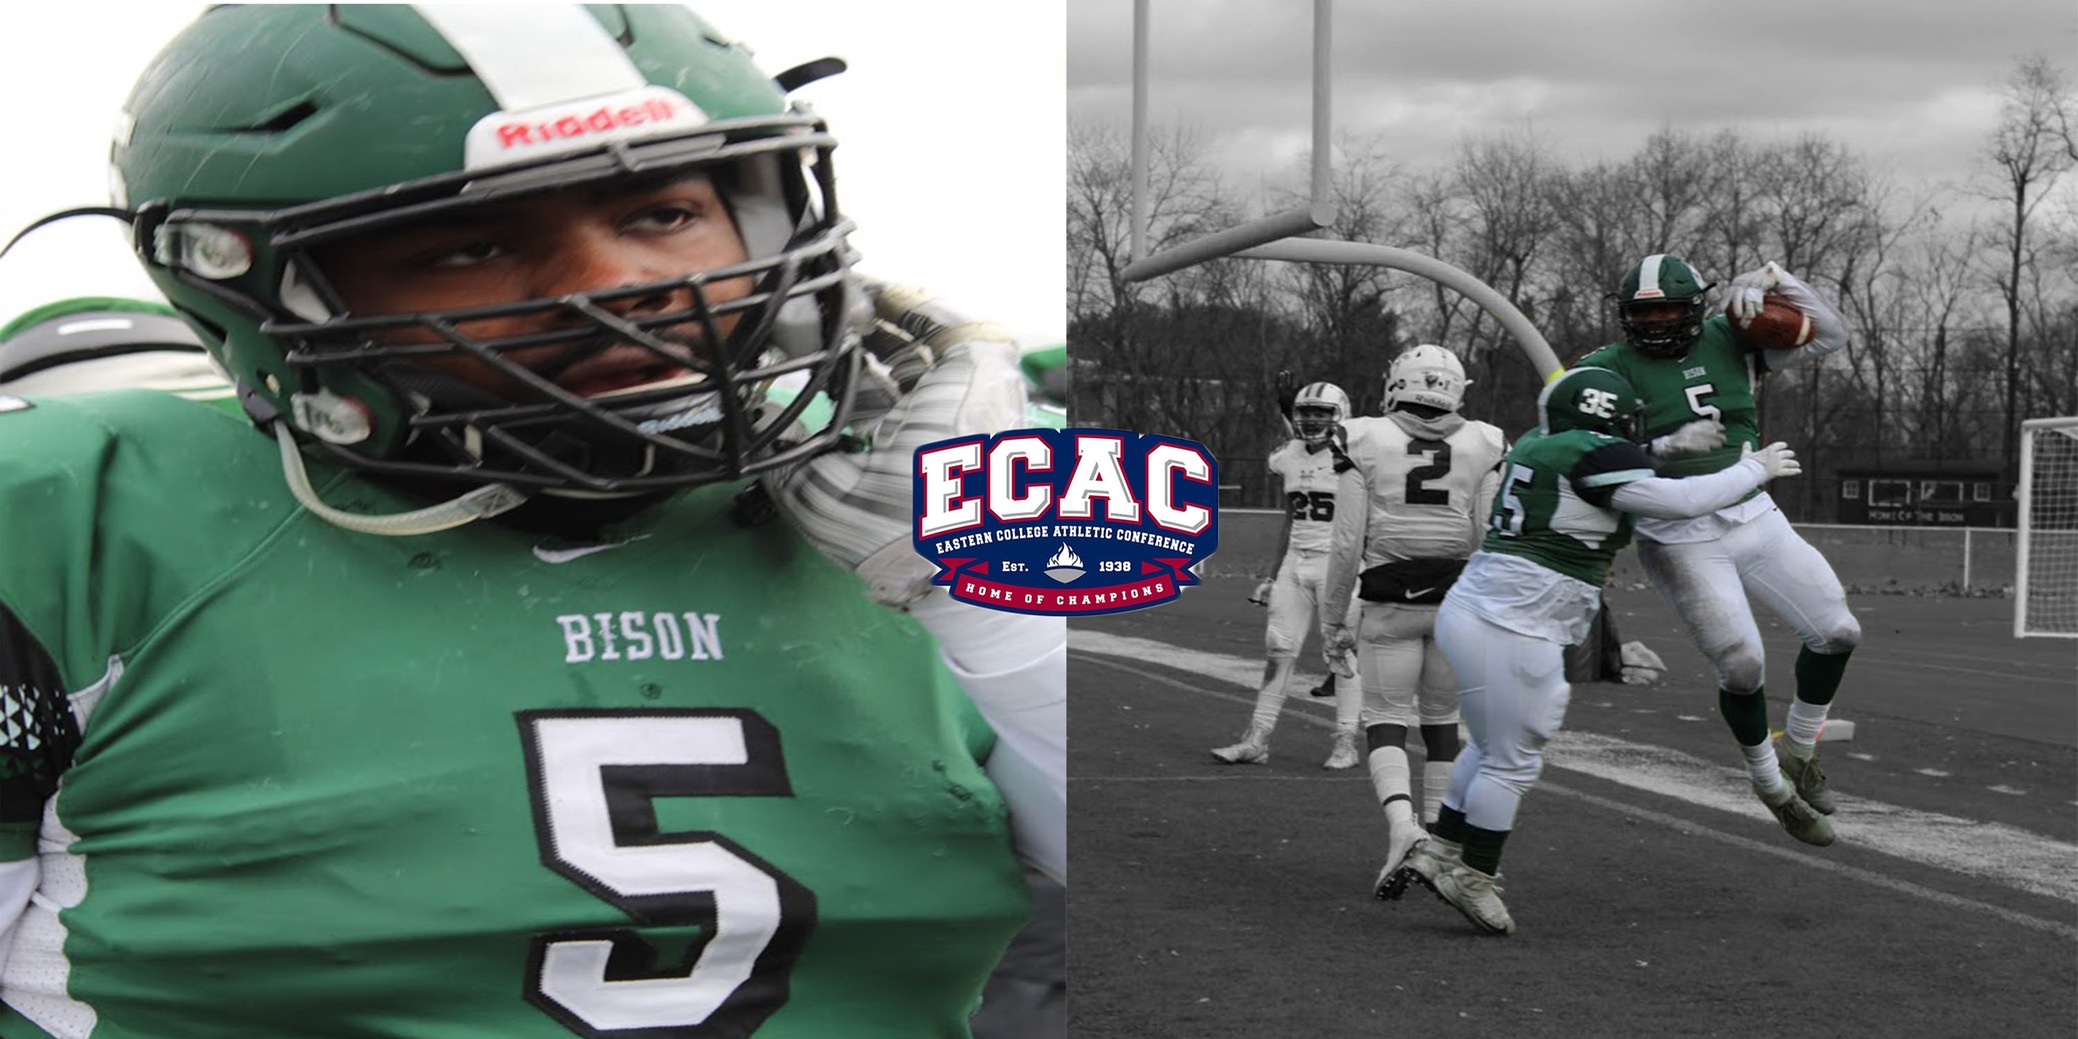 Gibson Earns All-Eastern College Athletic Conference (ECAC) Honors